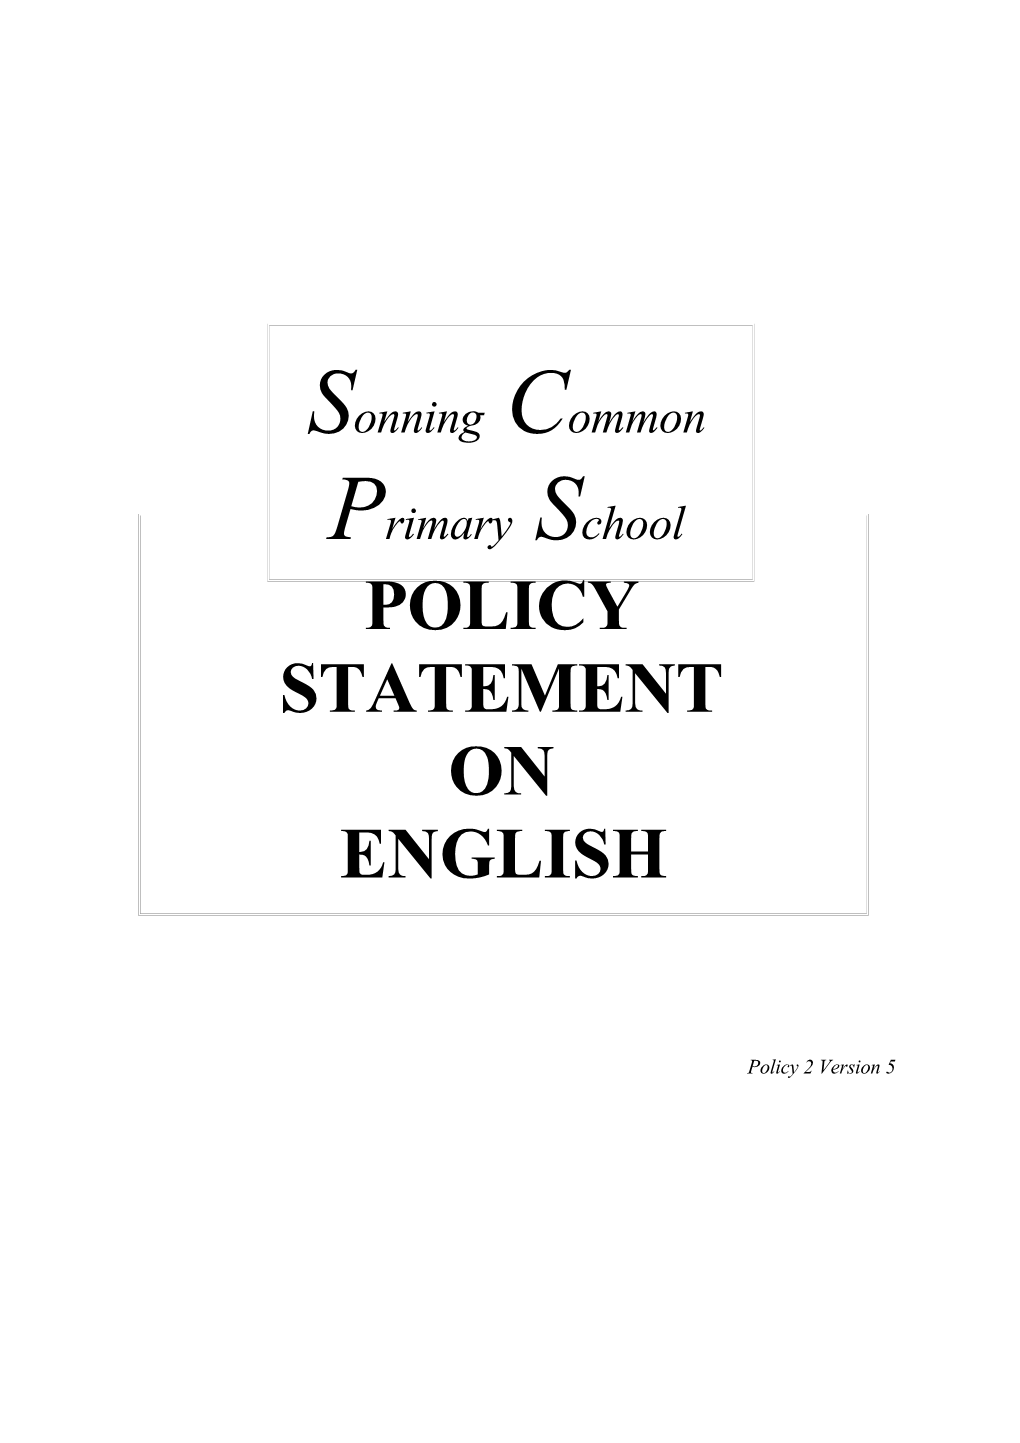 Policy Statement for English